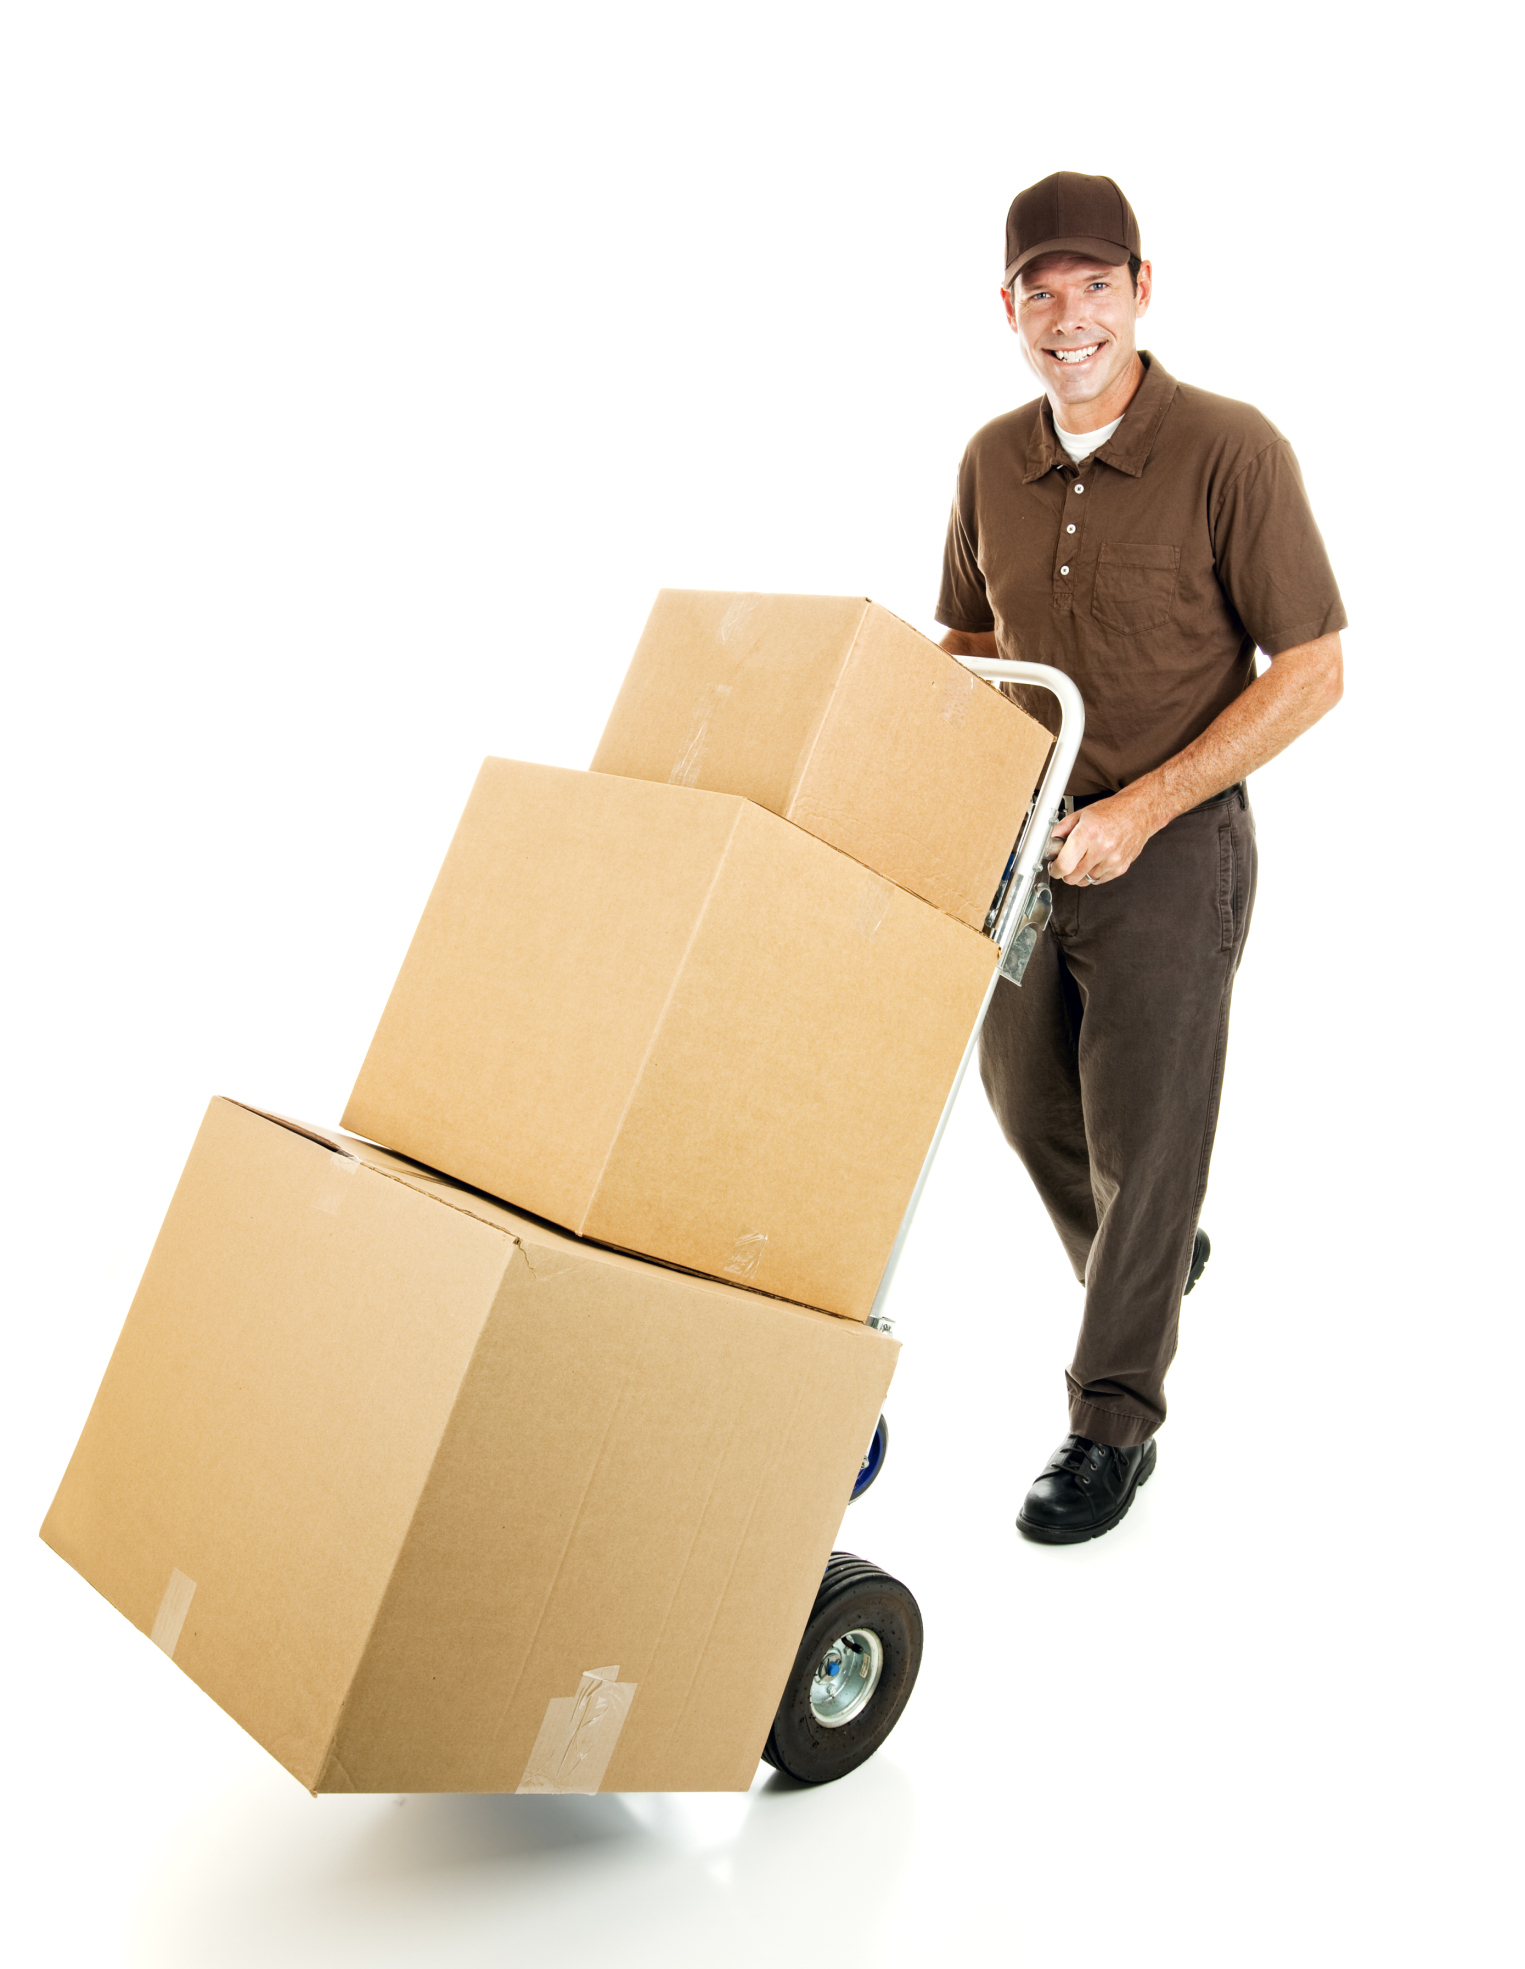 Top Los Angeles movers